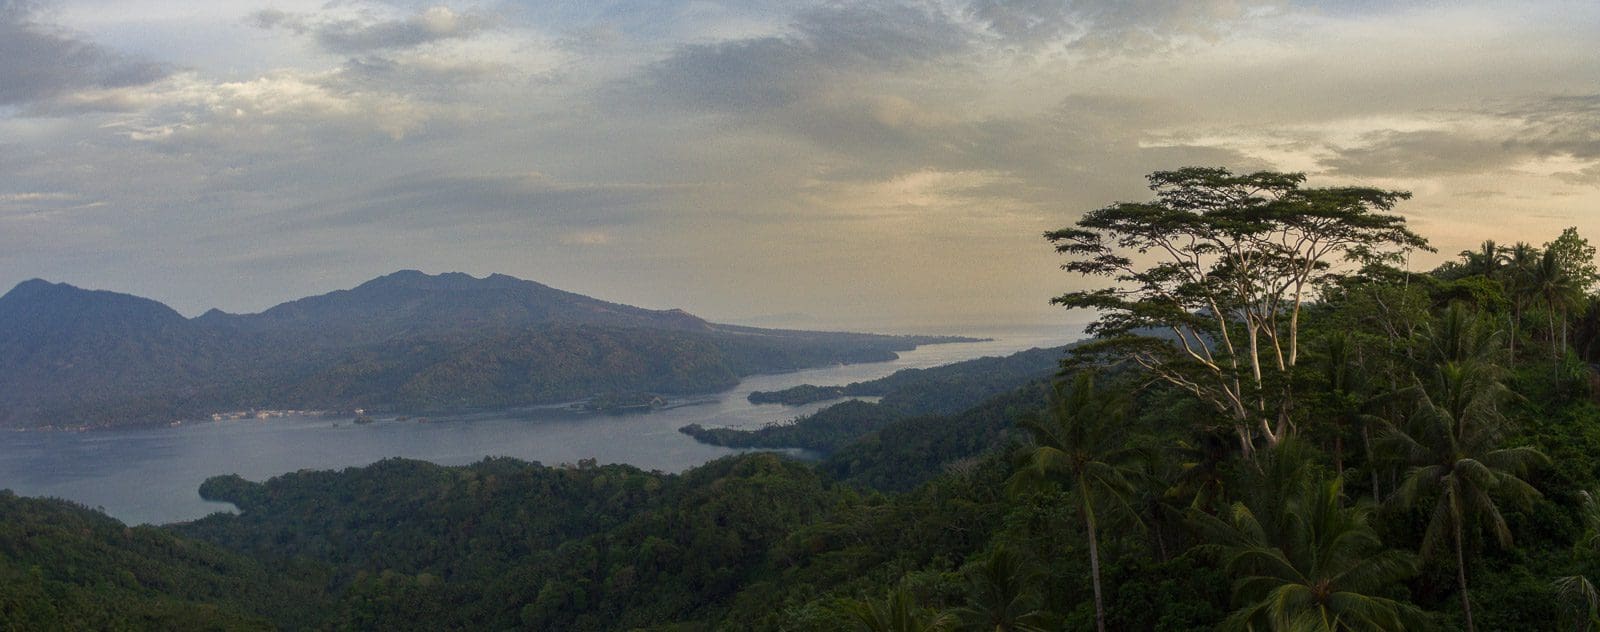 Viewpoint in Lembeh Island, North Sulawesi